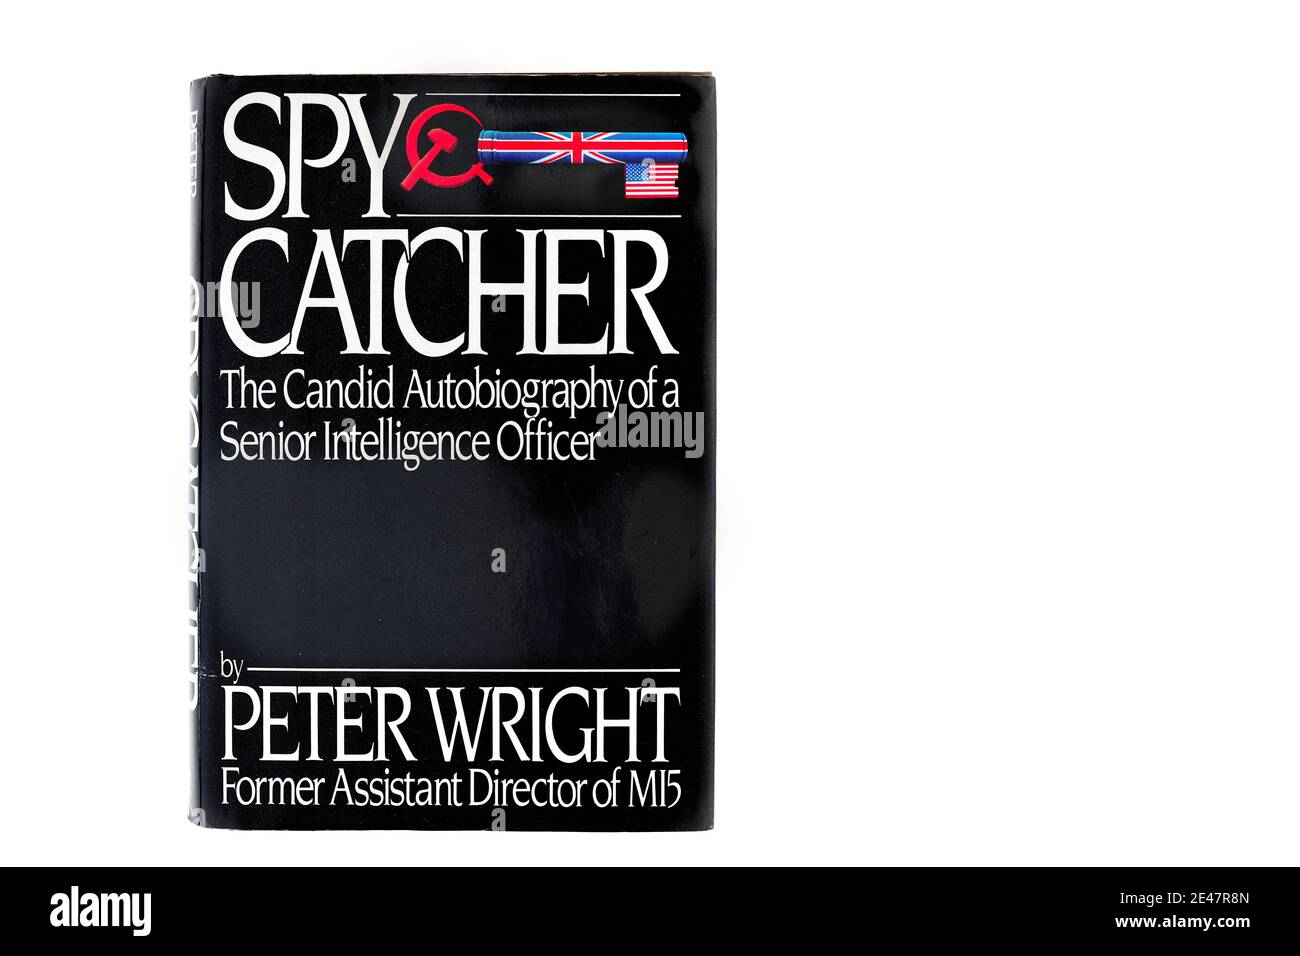 Book cover of 'Spy Catcher', autobiography of Peter Wright, former assistant director of english MI5 counter espionage agency. Stock Photo